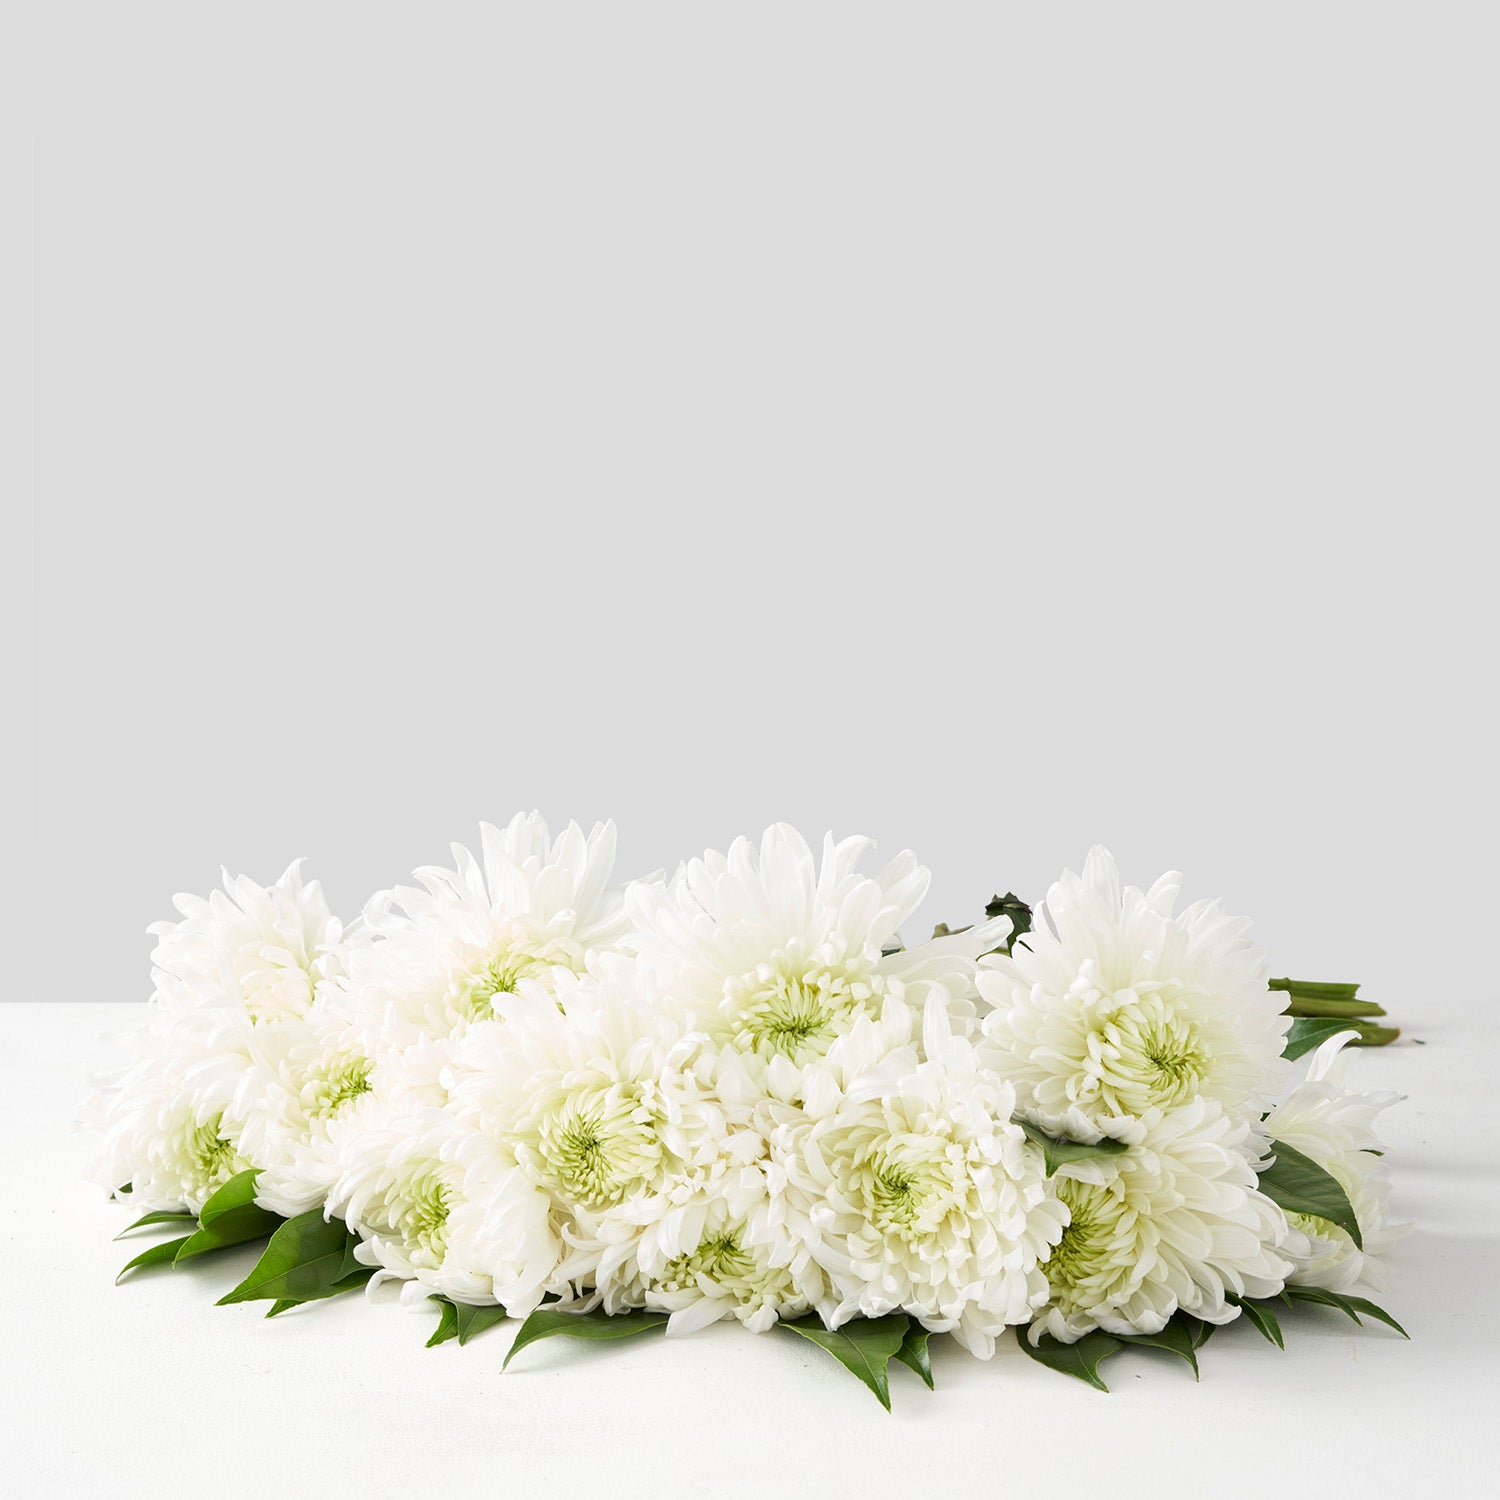 Large bouquet of chrysanthemums on white background.